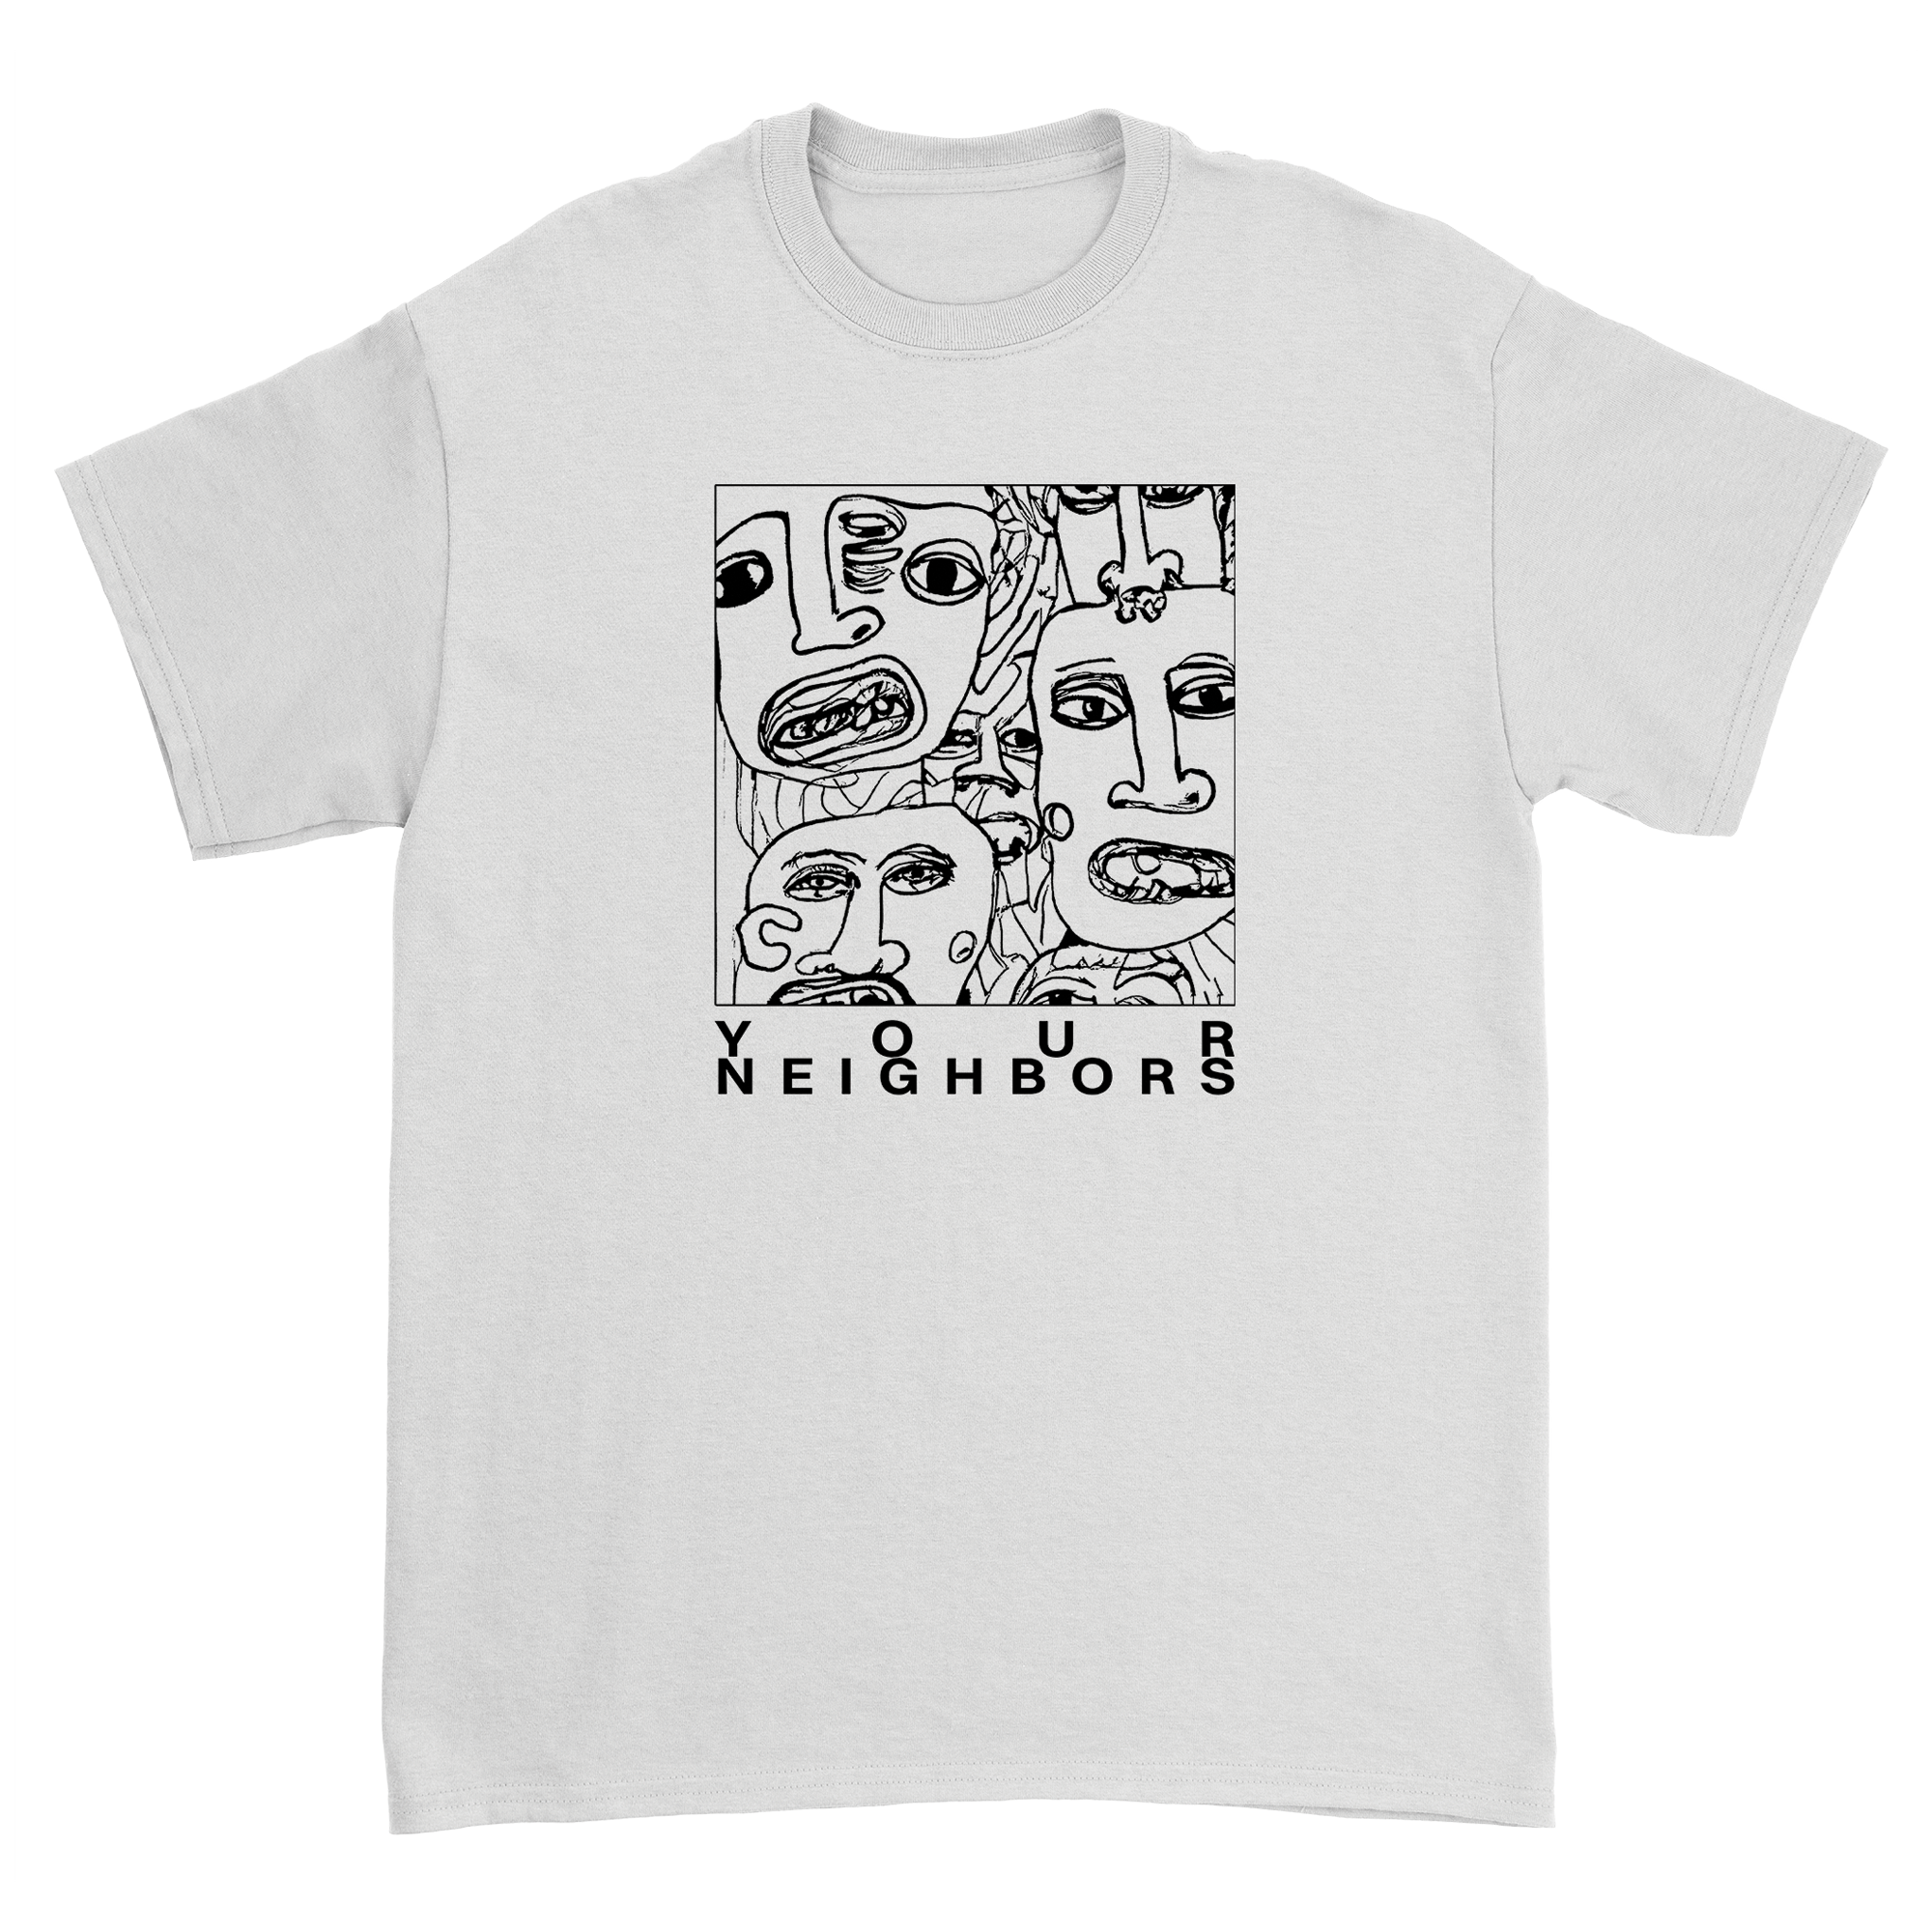 Your Neighbors - Faces T-Shirt (White)